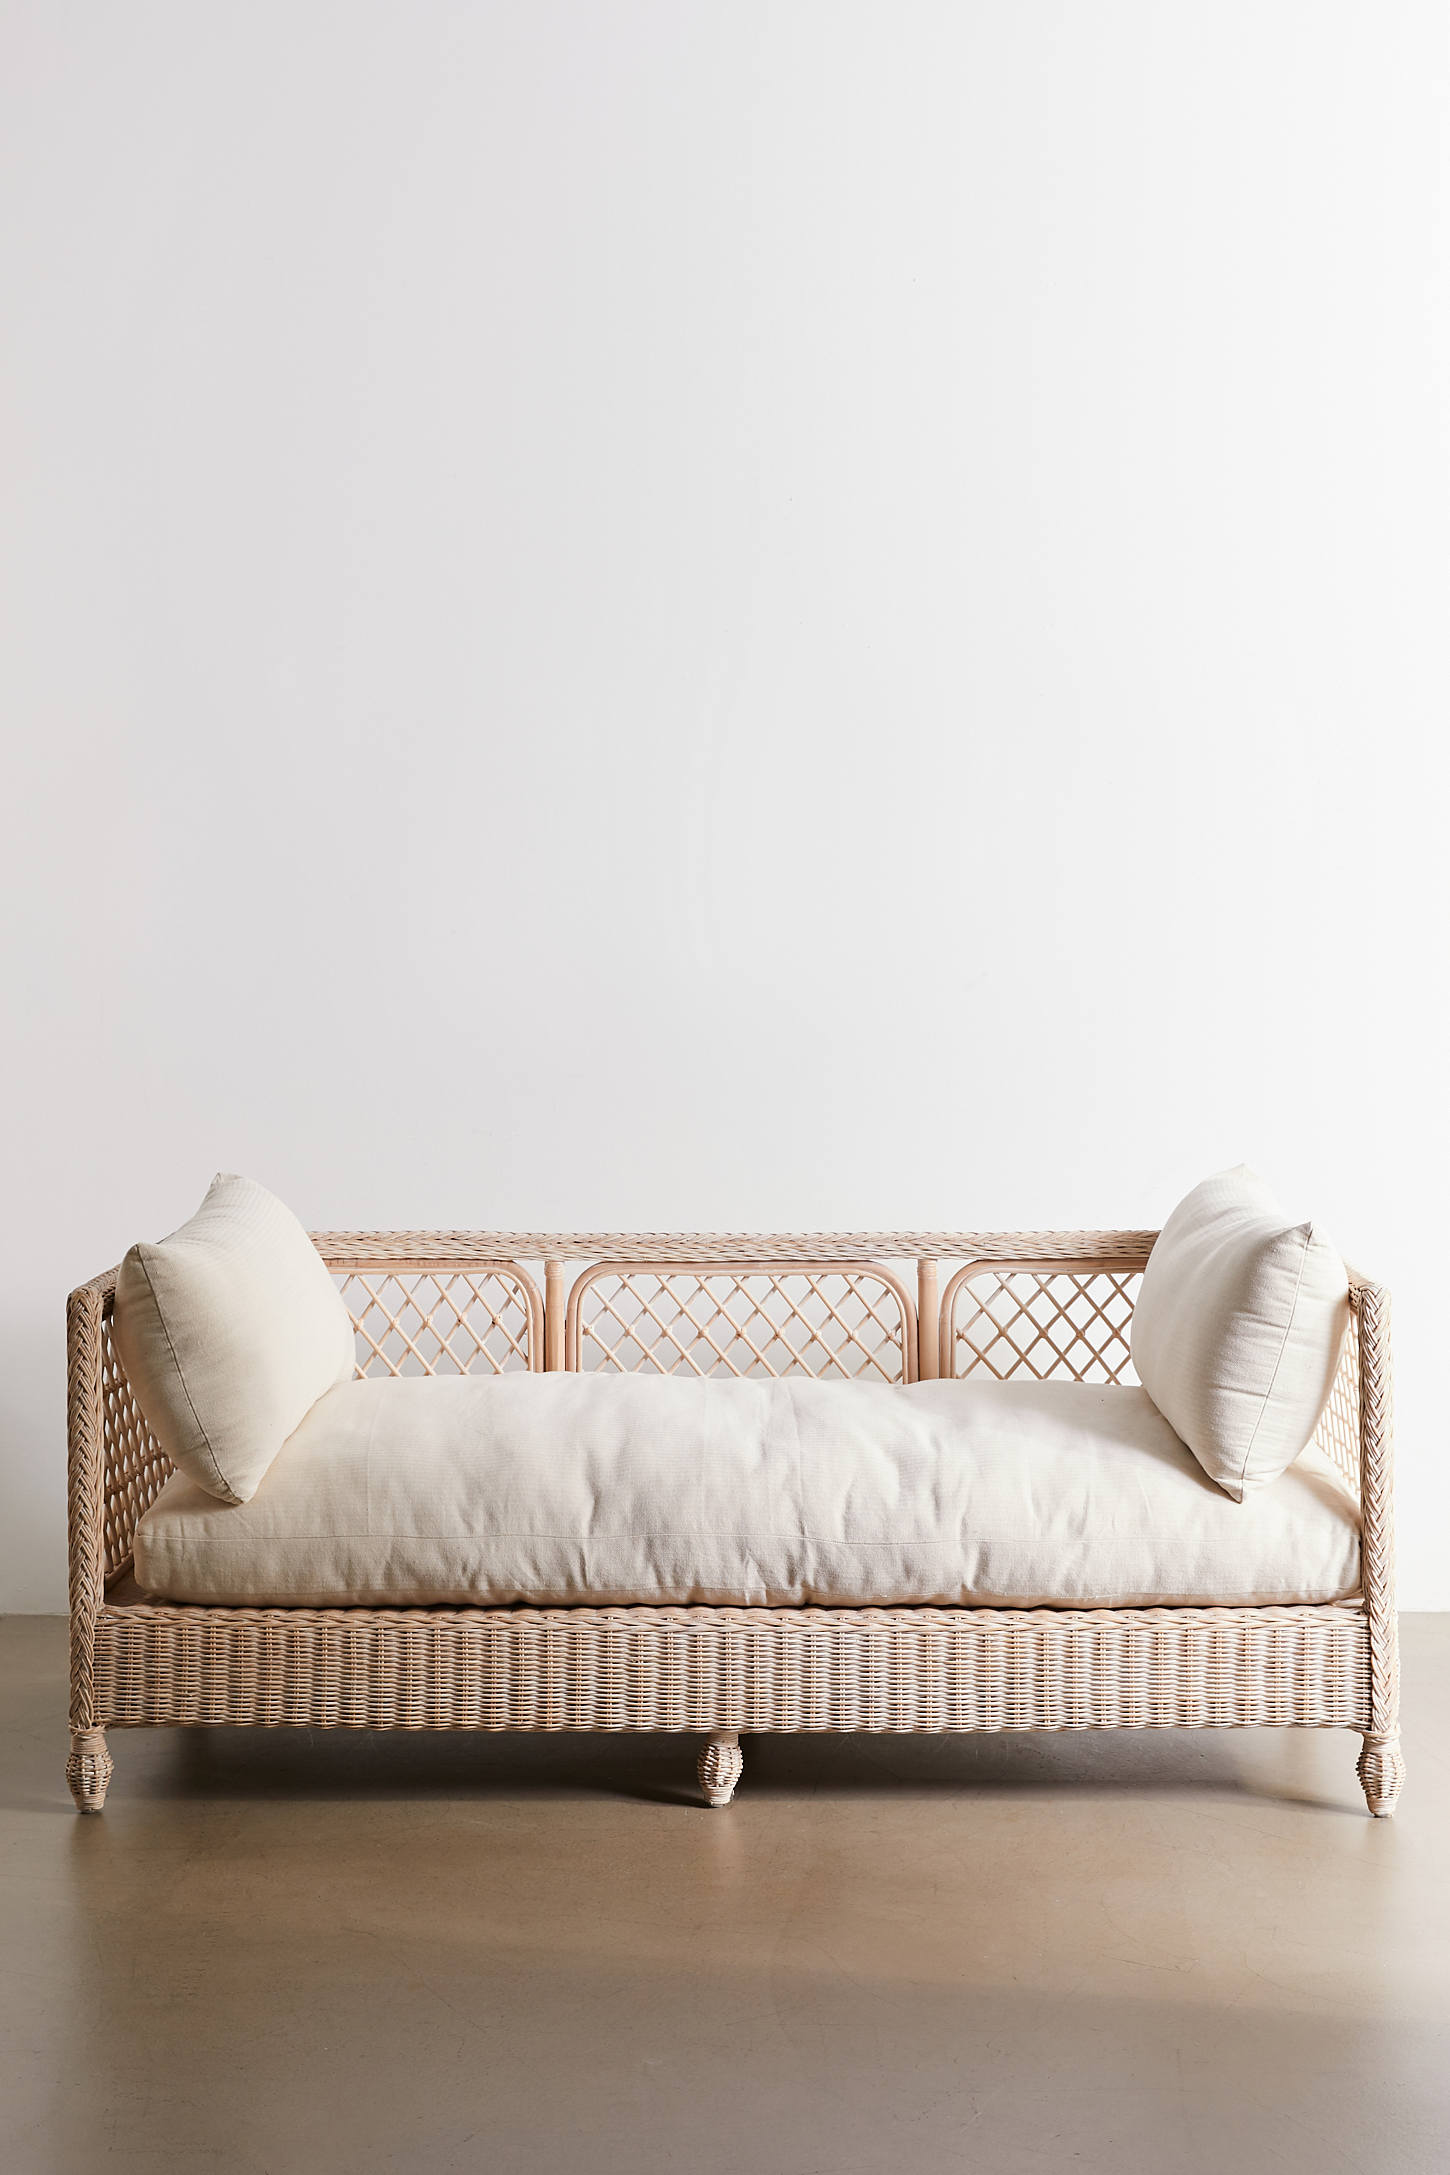 Woven Rattan Daybed